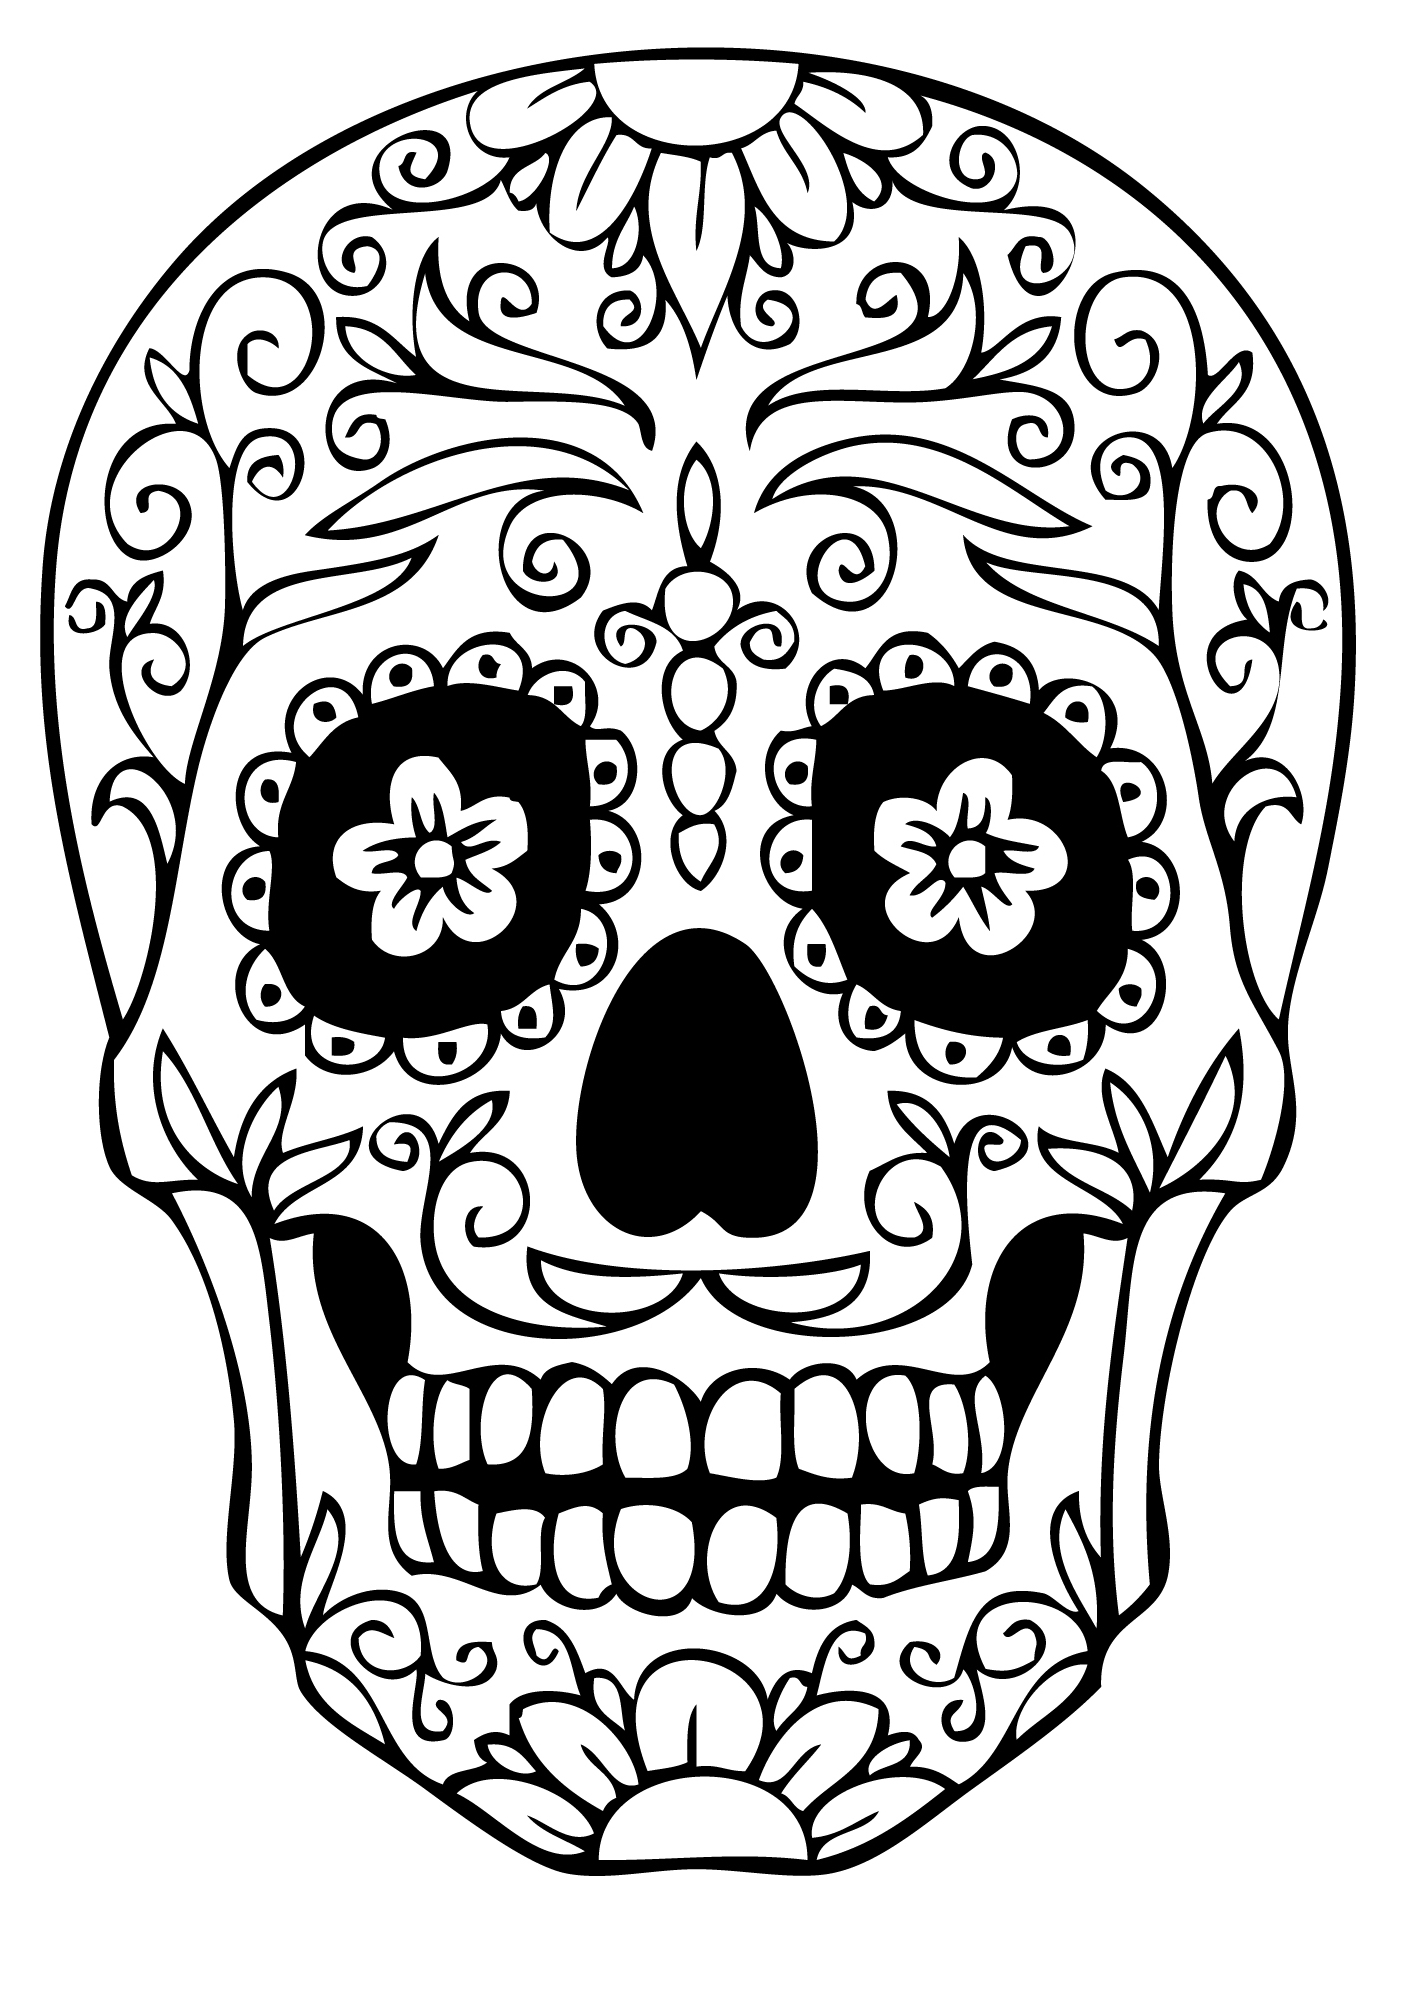 Drawing of dãas de los muertos day of the dead free to download and color